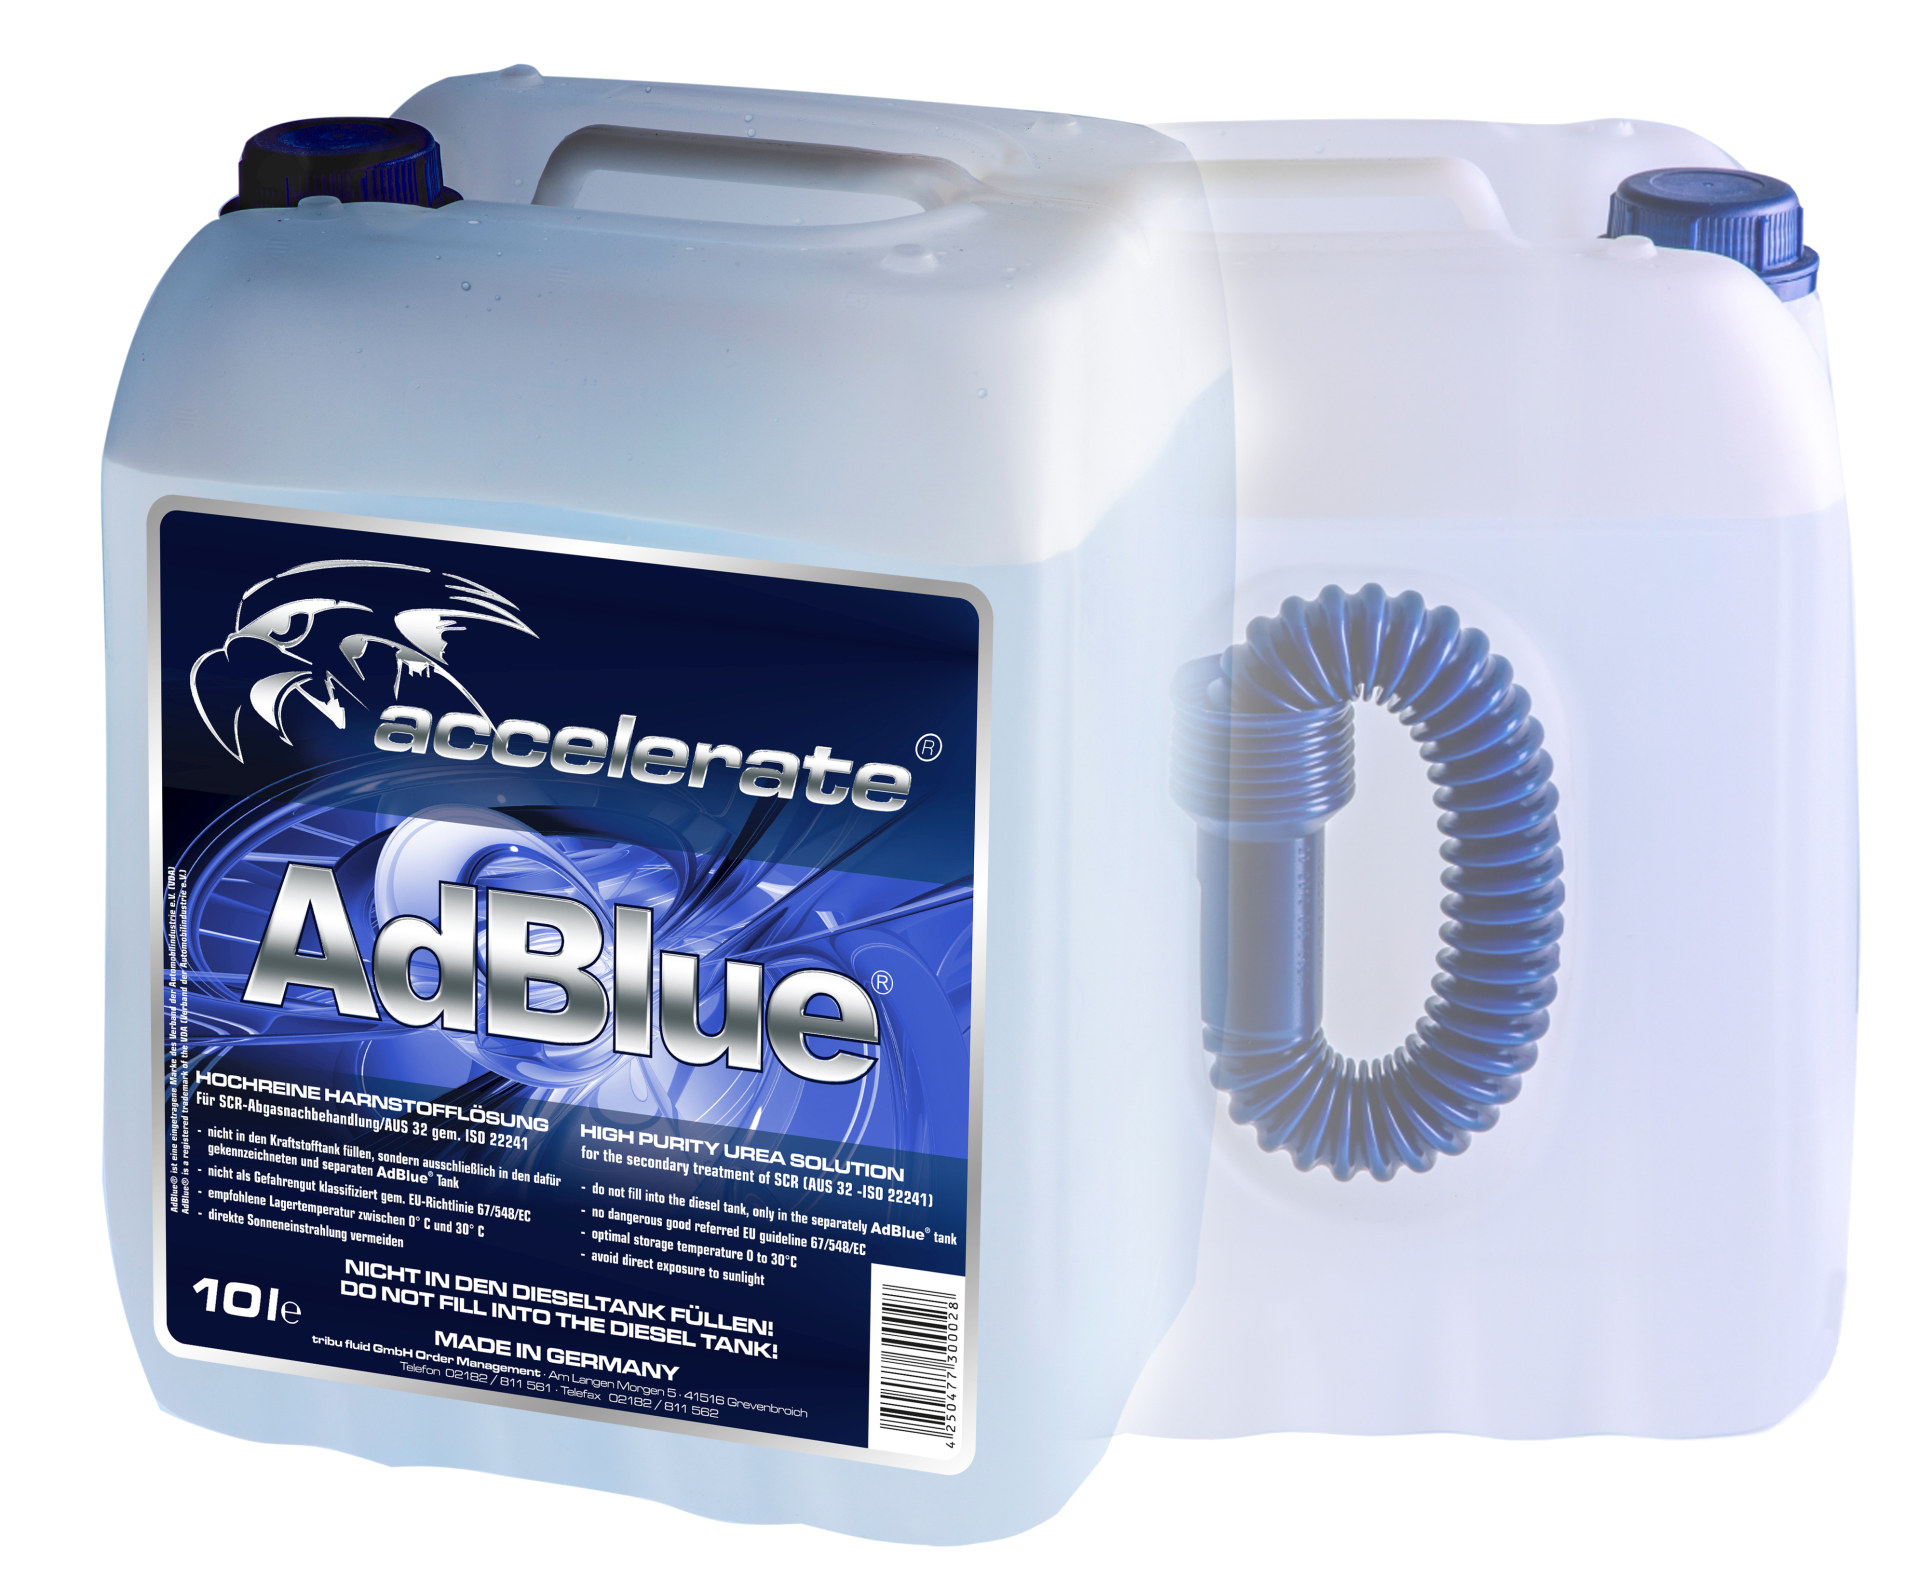 https://www.accelerate-lubricants.de/wp-content/uploads/2018/08/10_Liter_Kanister_AD_BLUE_ACCELERATE_FRONT_und_BACK_MONTAGE_1920px.jpg